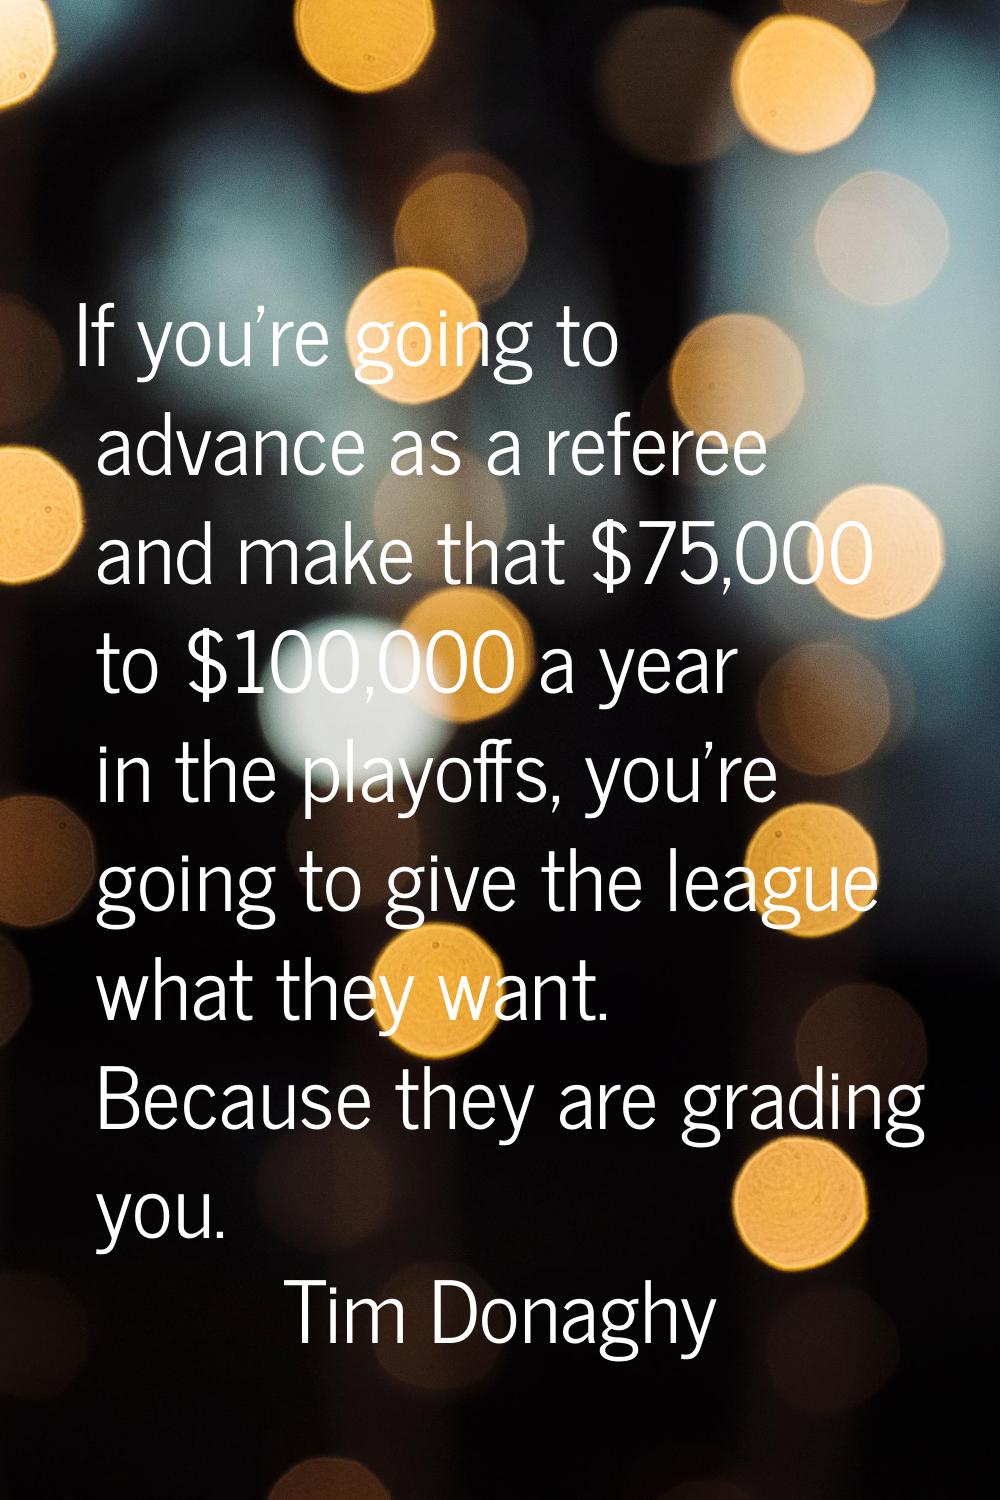 If you're going to advance as a referee and make that $75,000 to $100,000 a year in the playoffs, y